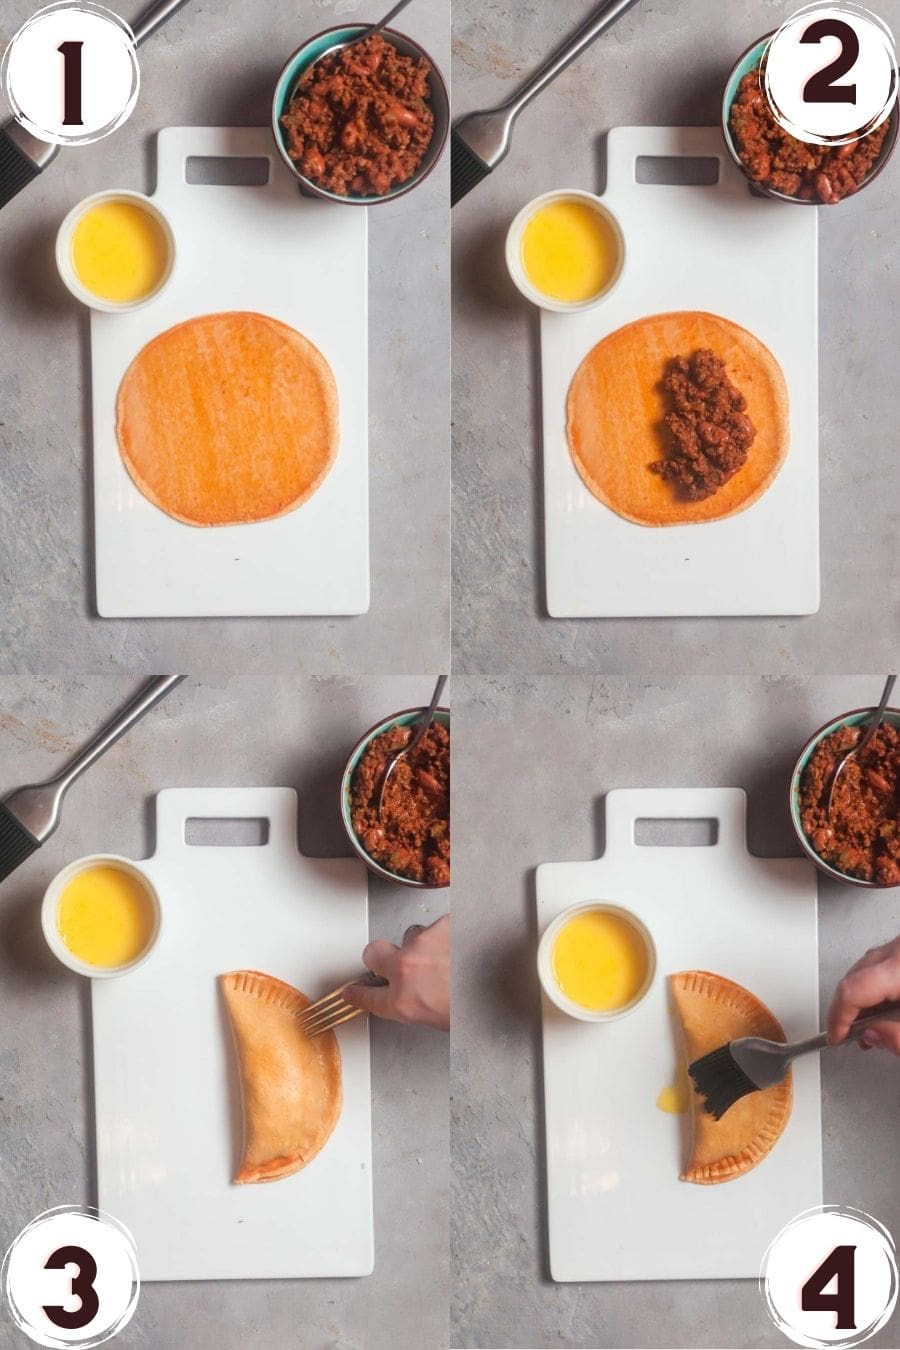 A collage of images showing how to fill and seal empanadas, step by step. 